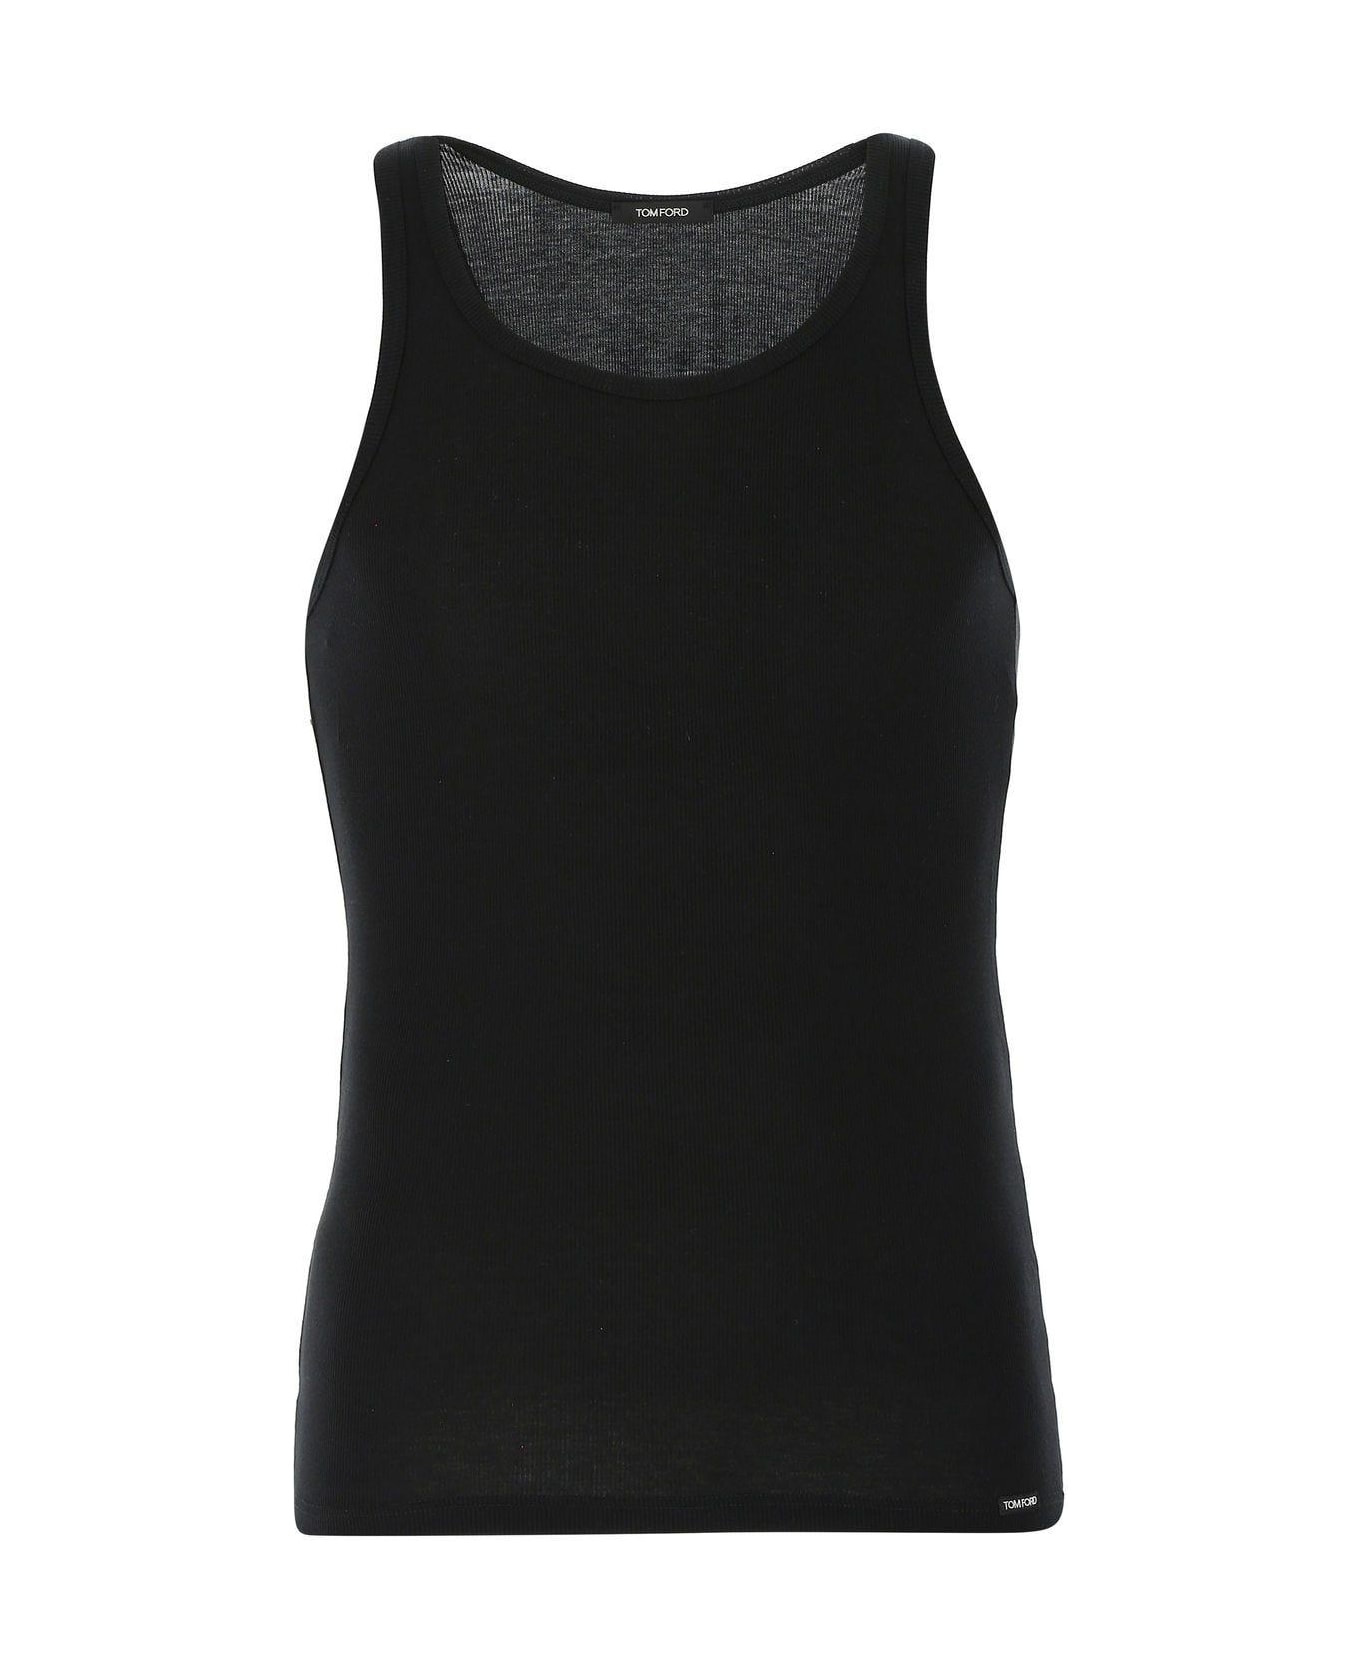 Tom Ford Black Cotton And Modal Tank Top - BLACK